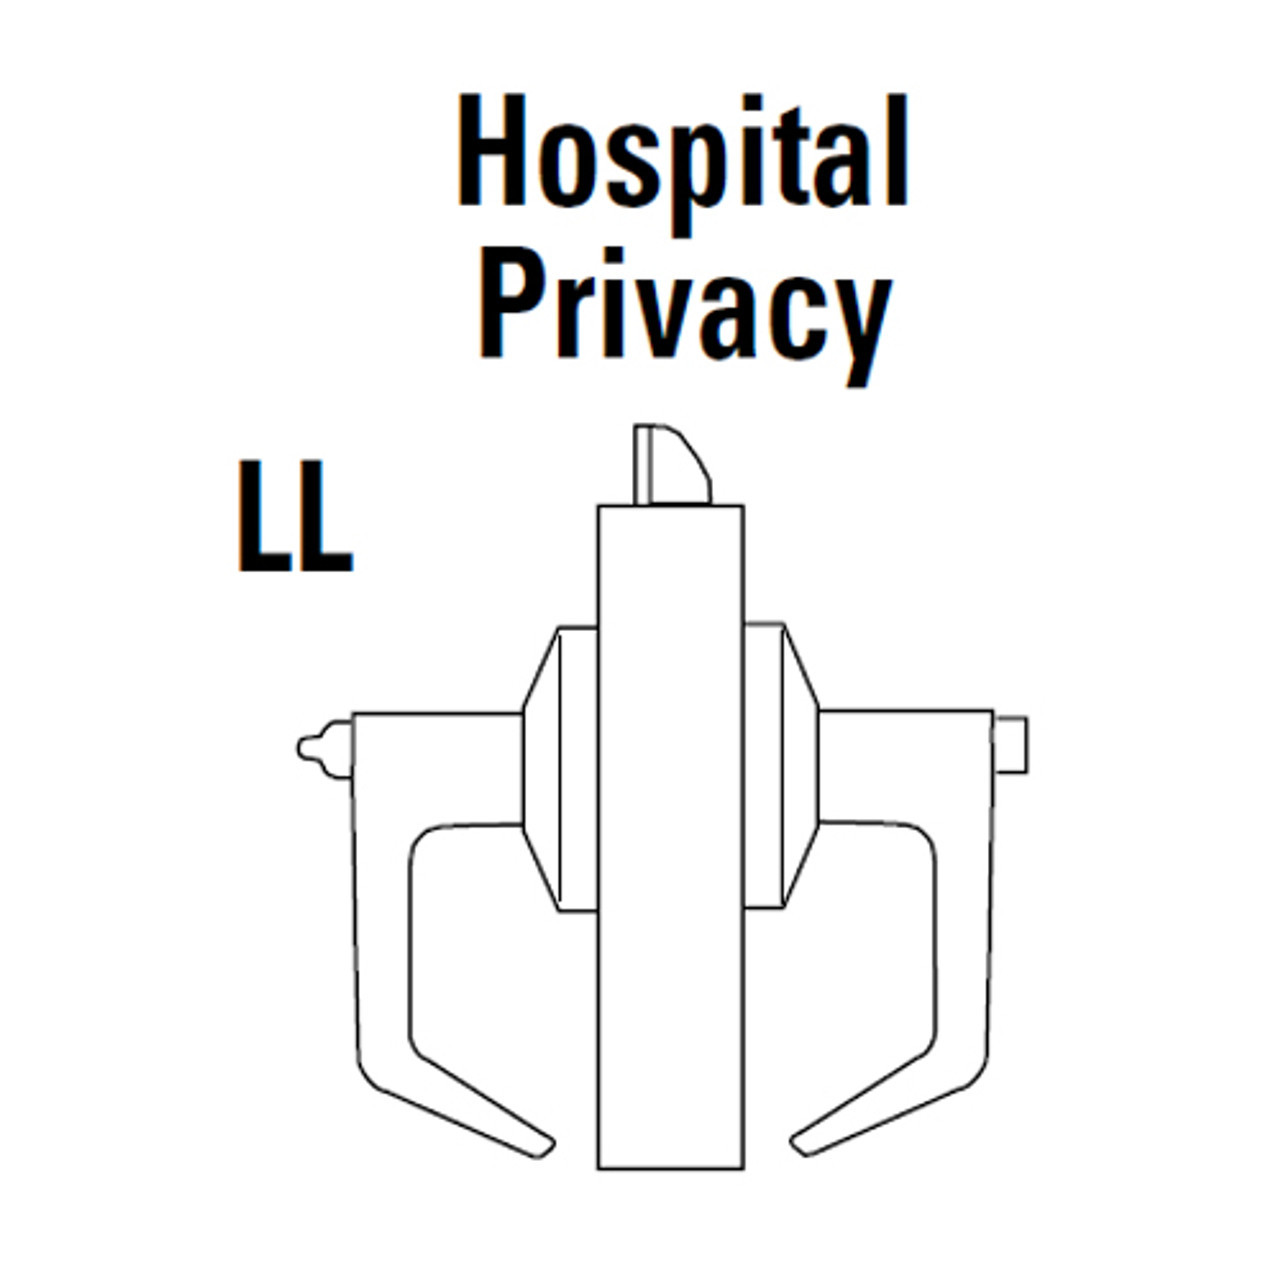 9K30LL16CS3618LM Best 9K Series Hospital Privacy Heavy Duty Cylindrical Lever Locks with Curved Without Return Lever Design in Bright Nickel